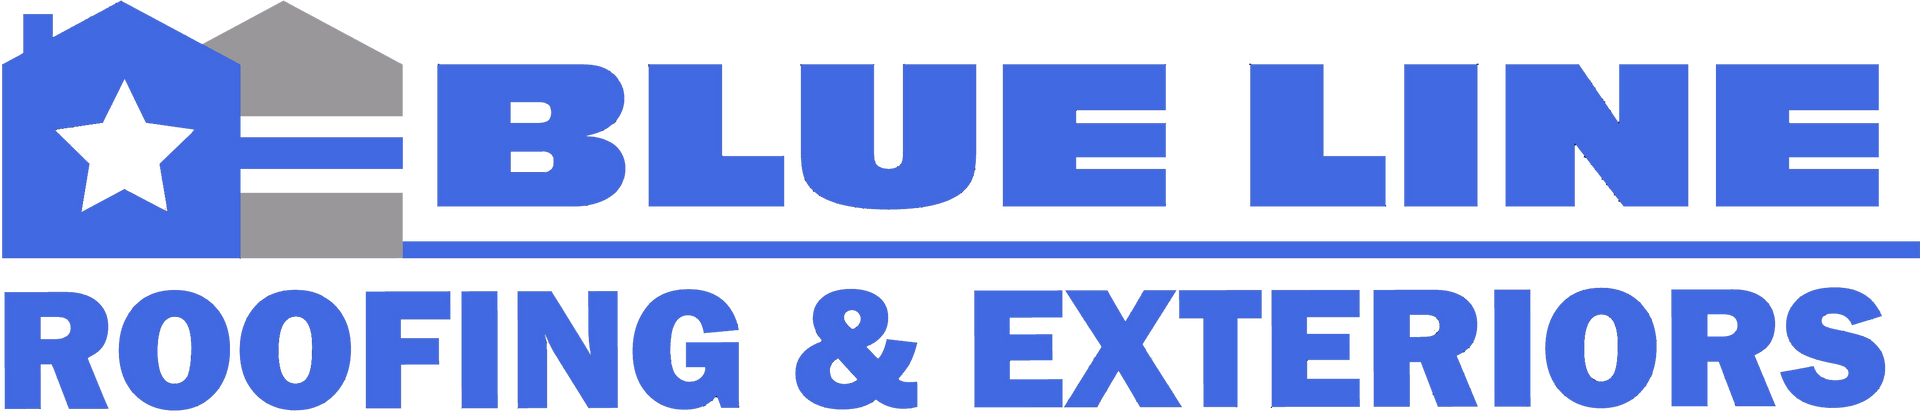 Blue Line Roofing & Exteriors - Logo